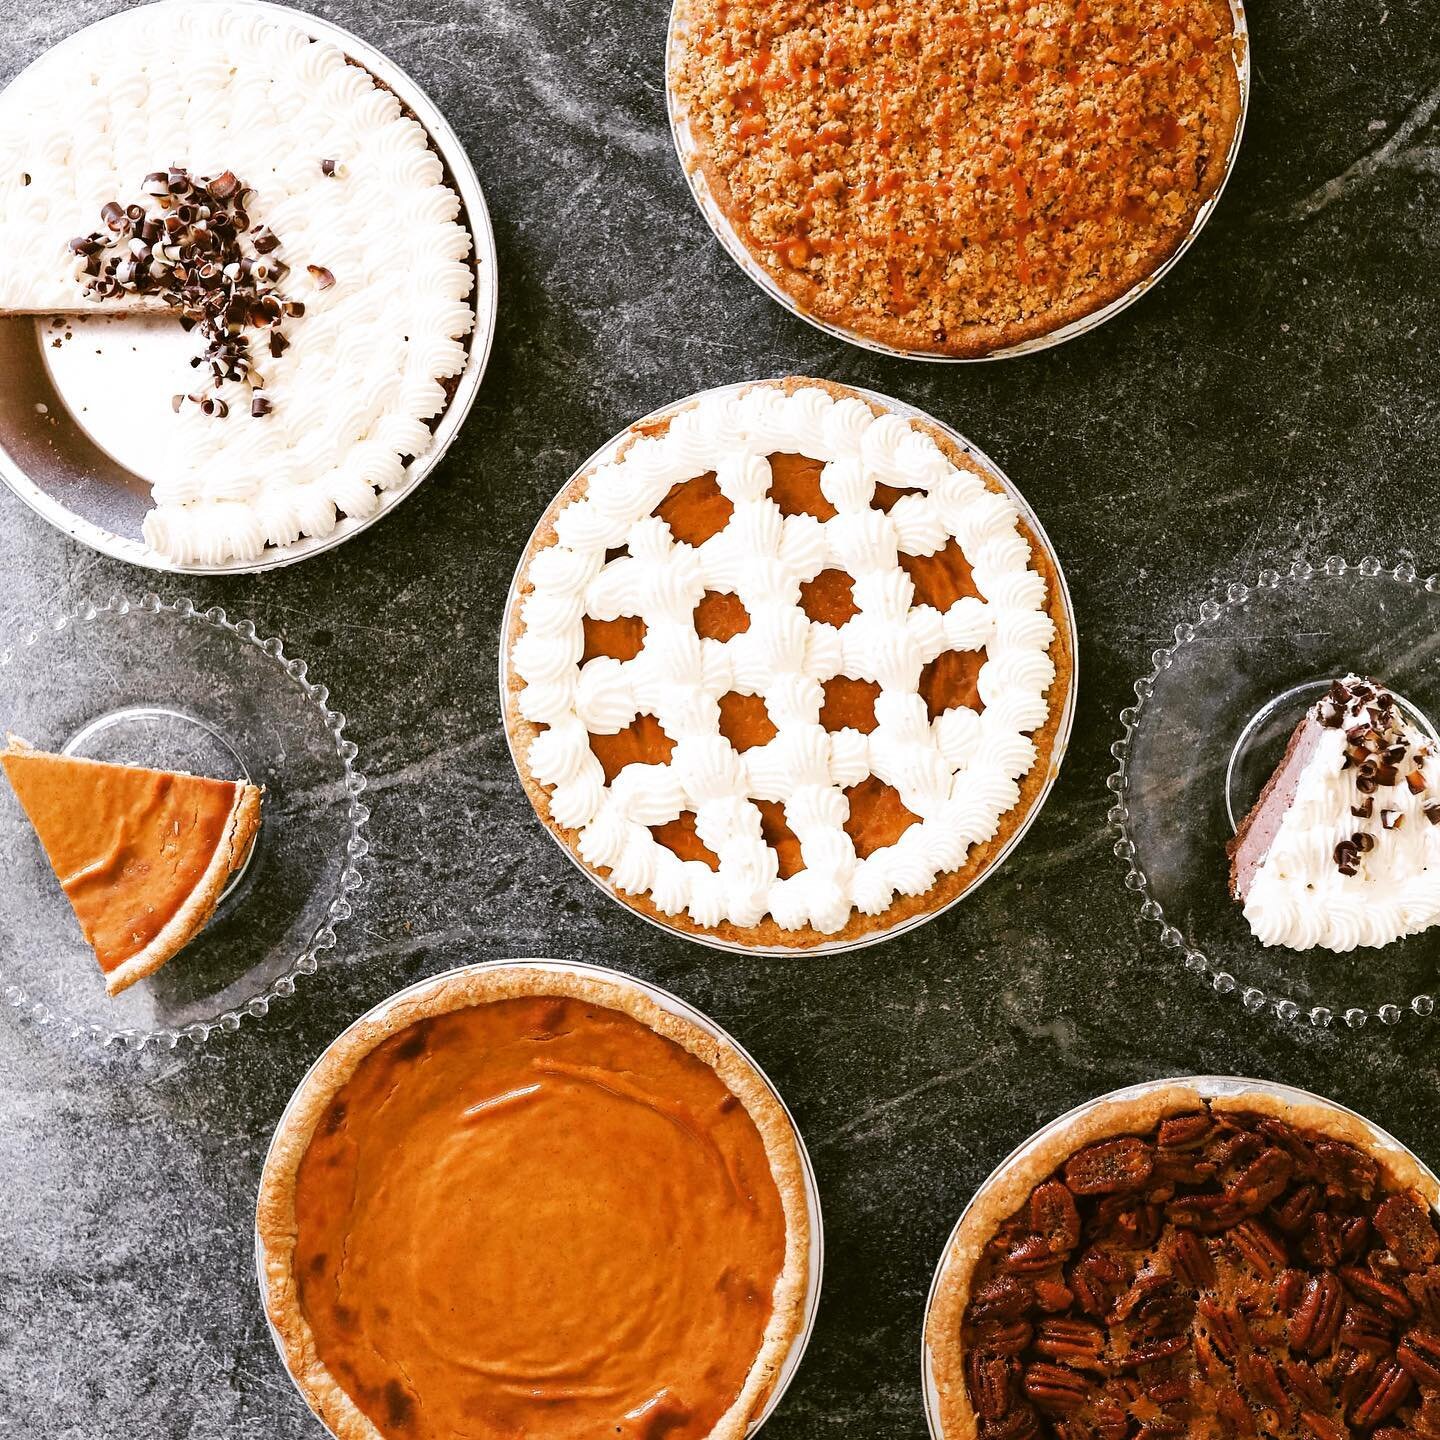 Come and try some of our fall favorites today @mckeeversmarket in lee summit! Curt will be sampling from 11:00 to 3:00 🥧 chocolate truffle silk, pumpkin, pecan, caramel apple, and pumpkin cream. 

#pie #localpie #MoPie #MoPieCo #asliceabove #giveMol